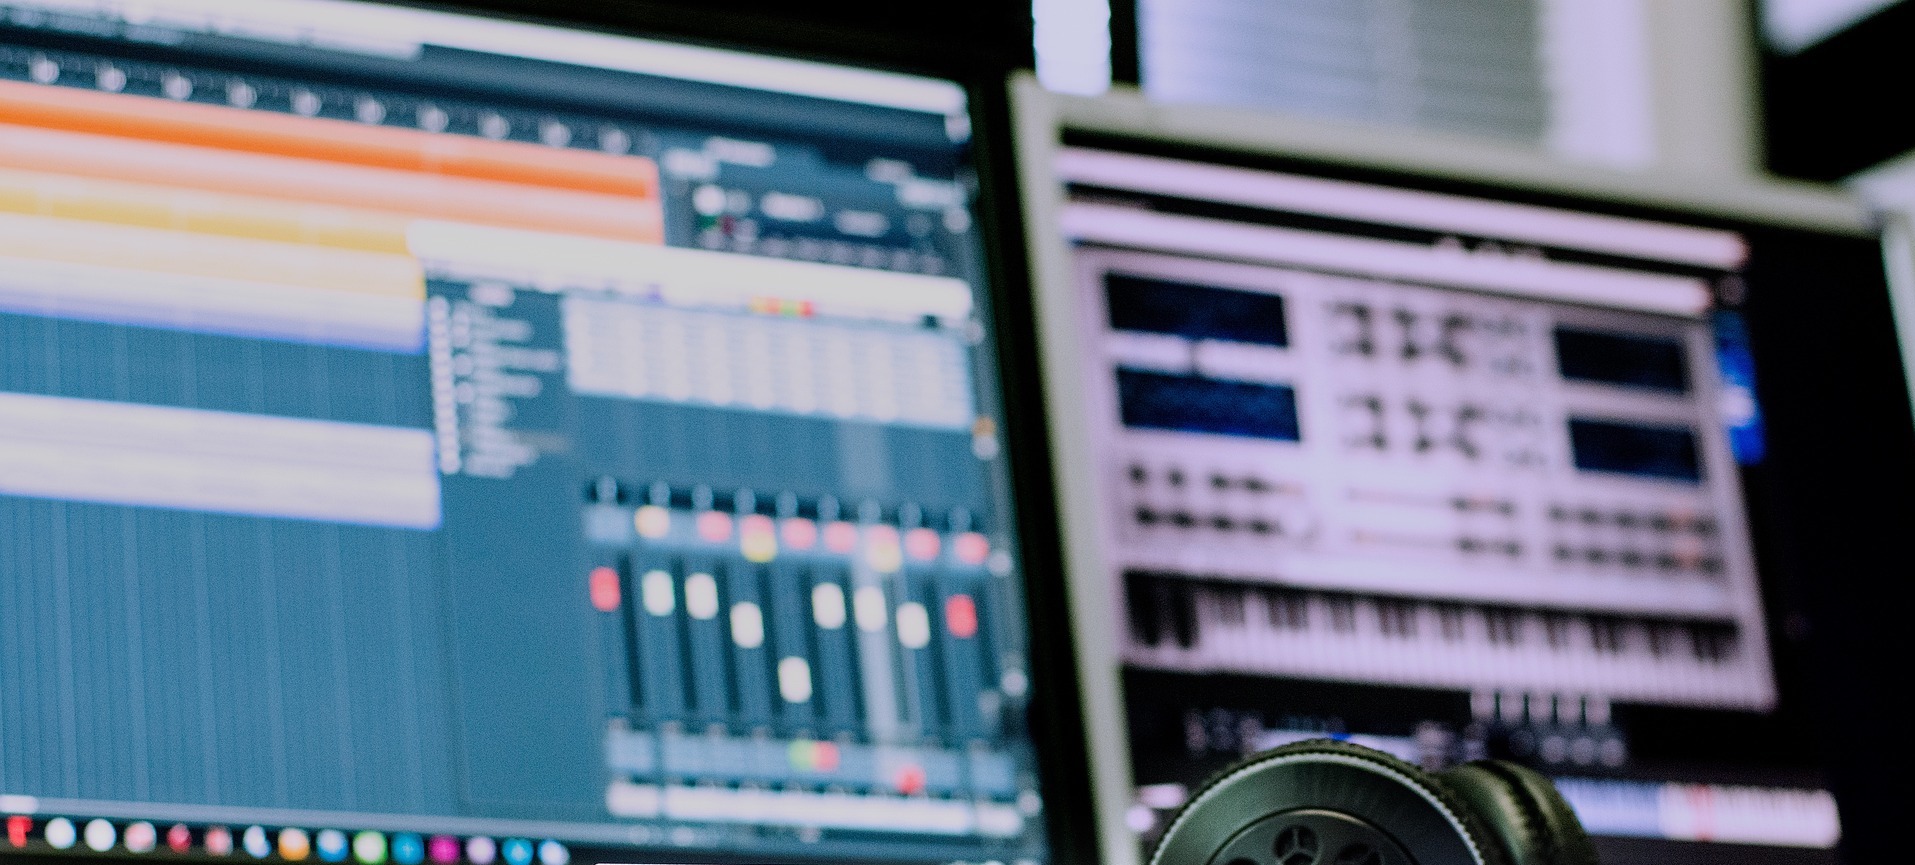 Read more about the article How to prepare your mixes for mastering